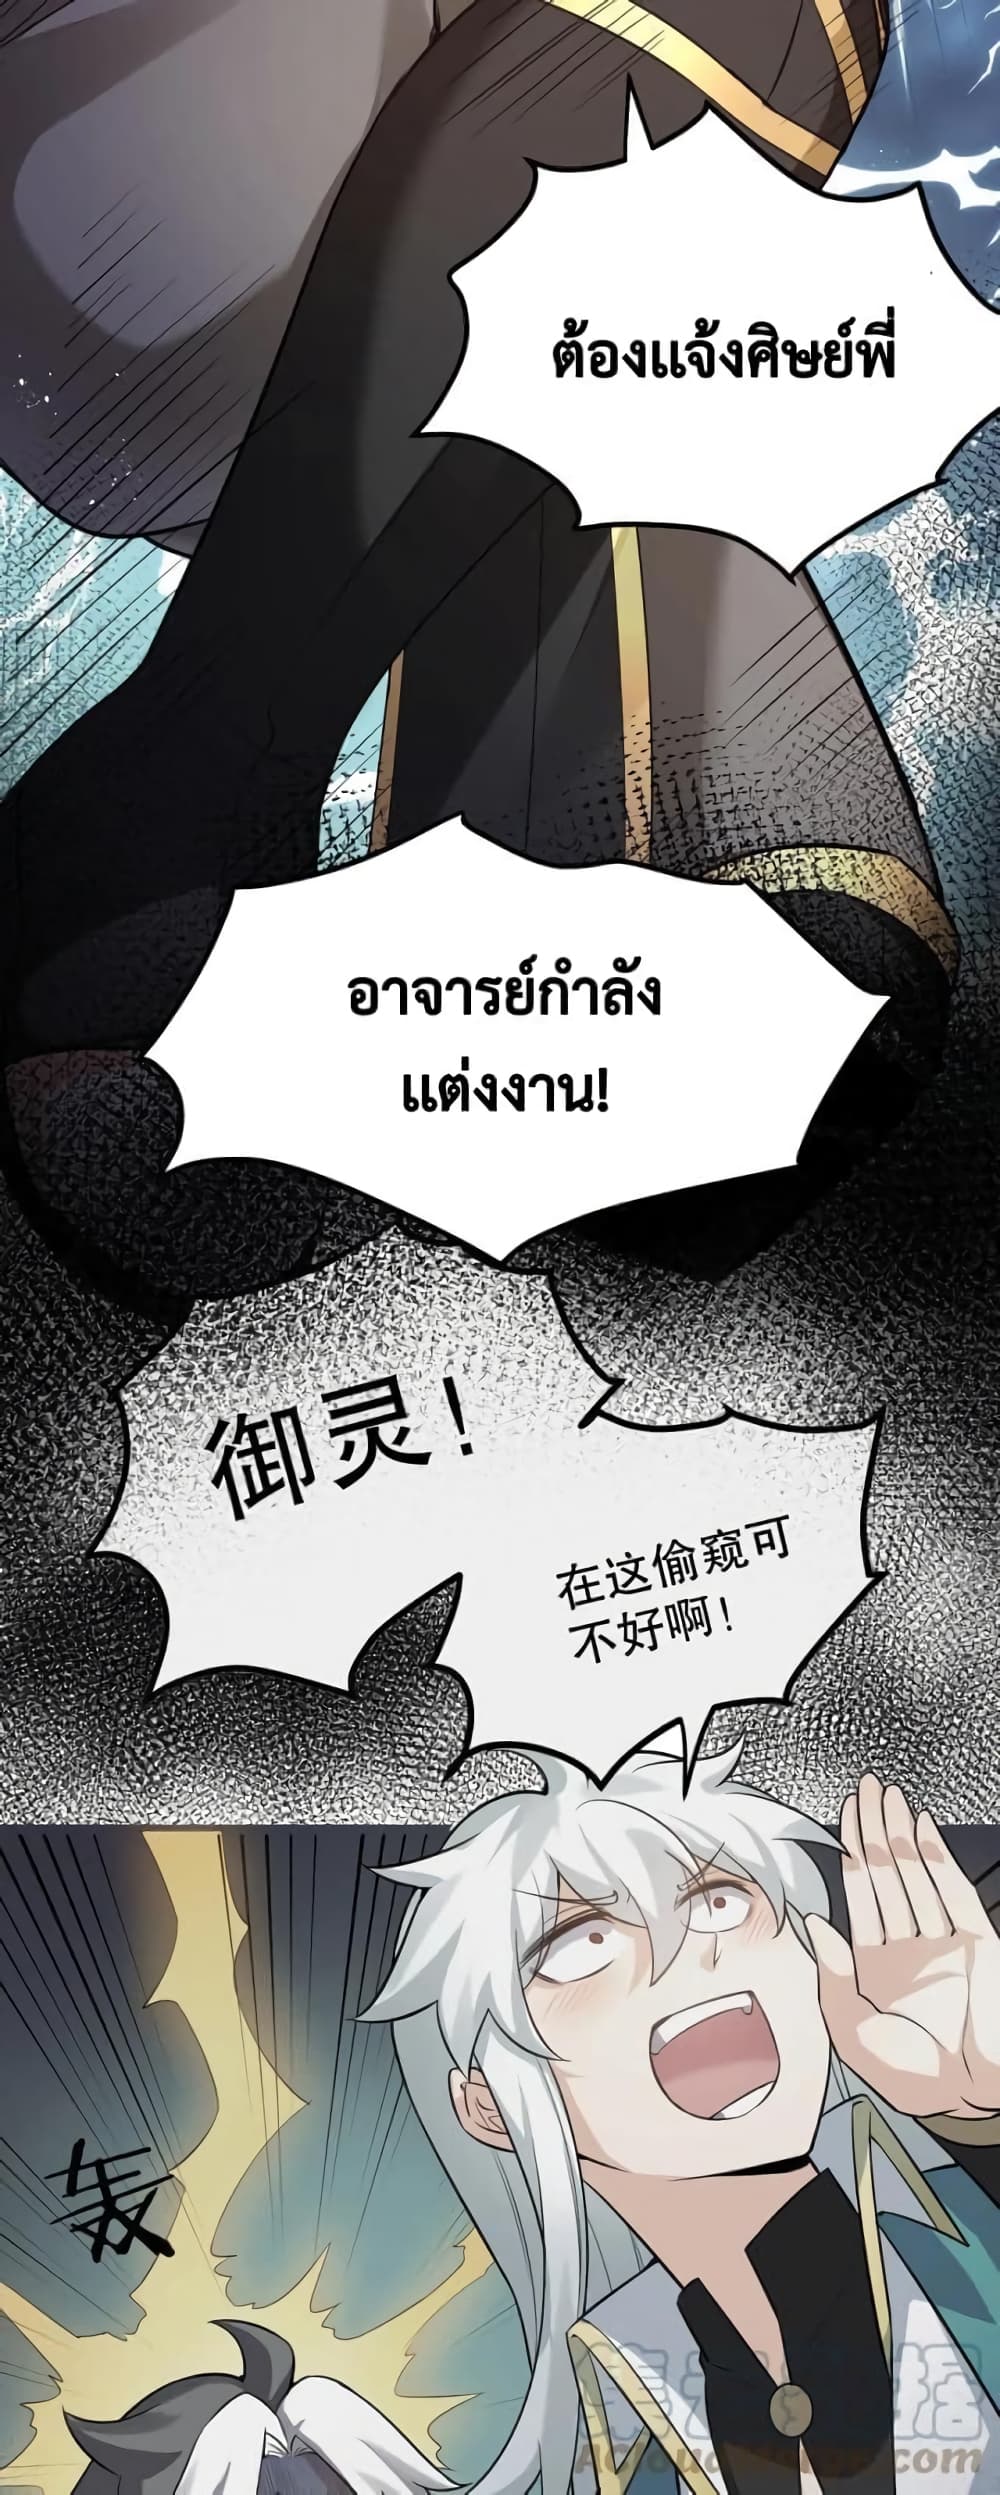 Godsian Masian from Another World ตอนที่ 101 (32)